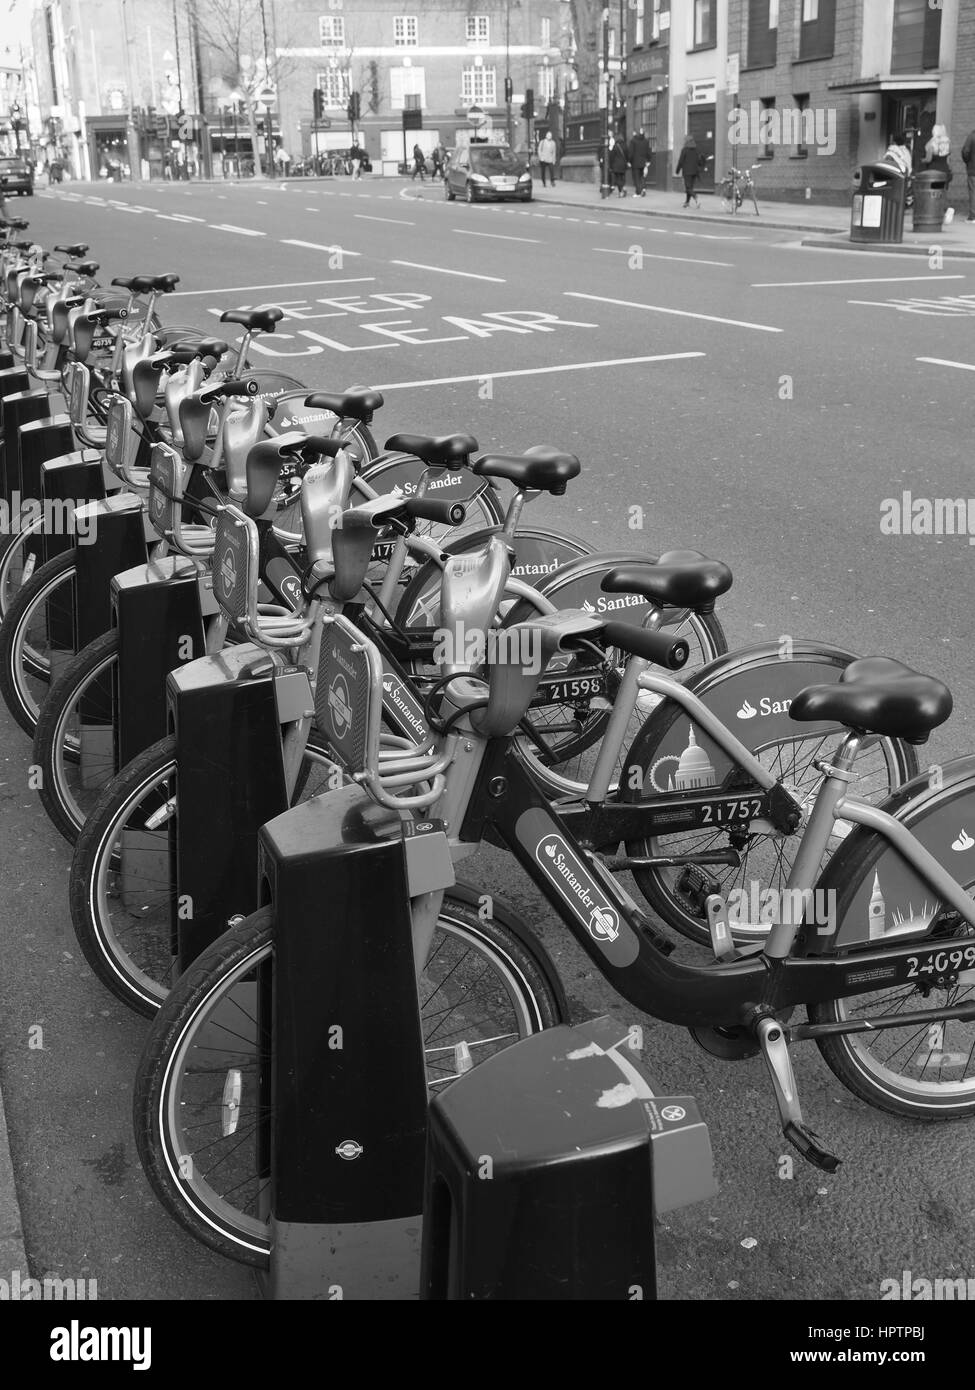 Boris bikes, cycles for hire rental in docking bay, Stock Photo